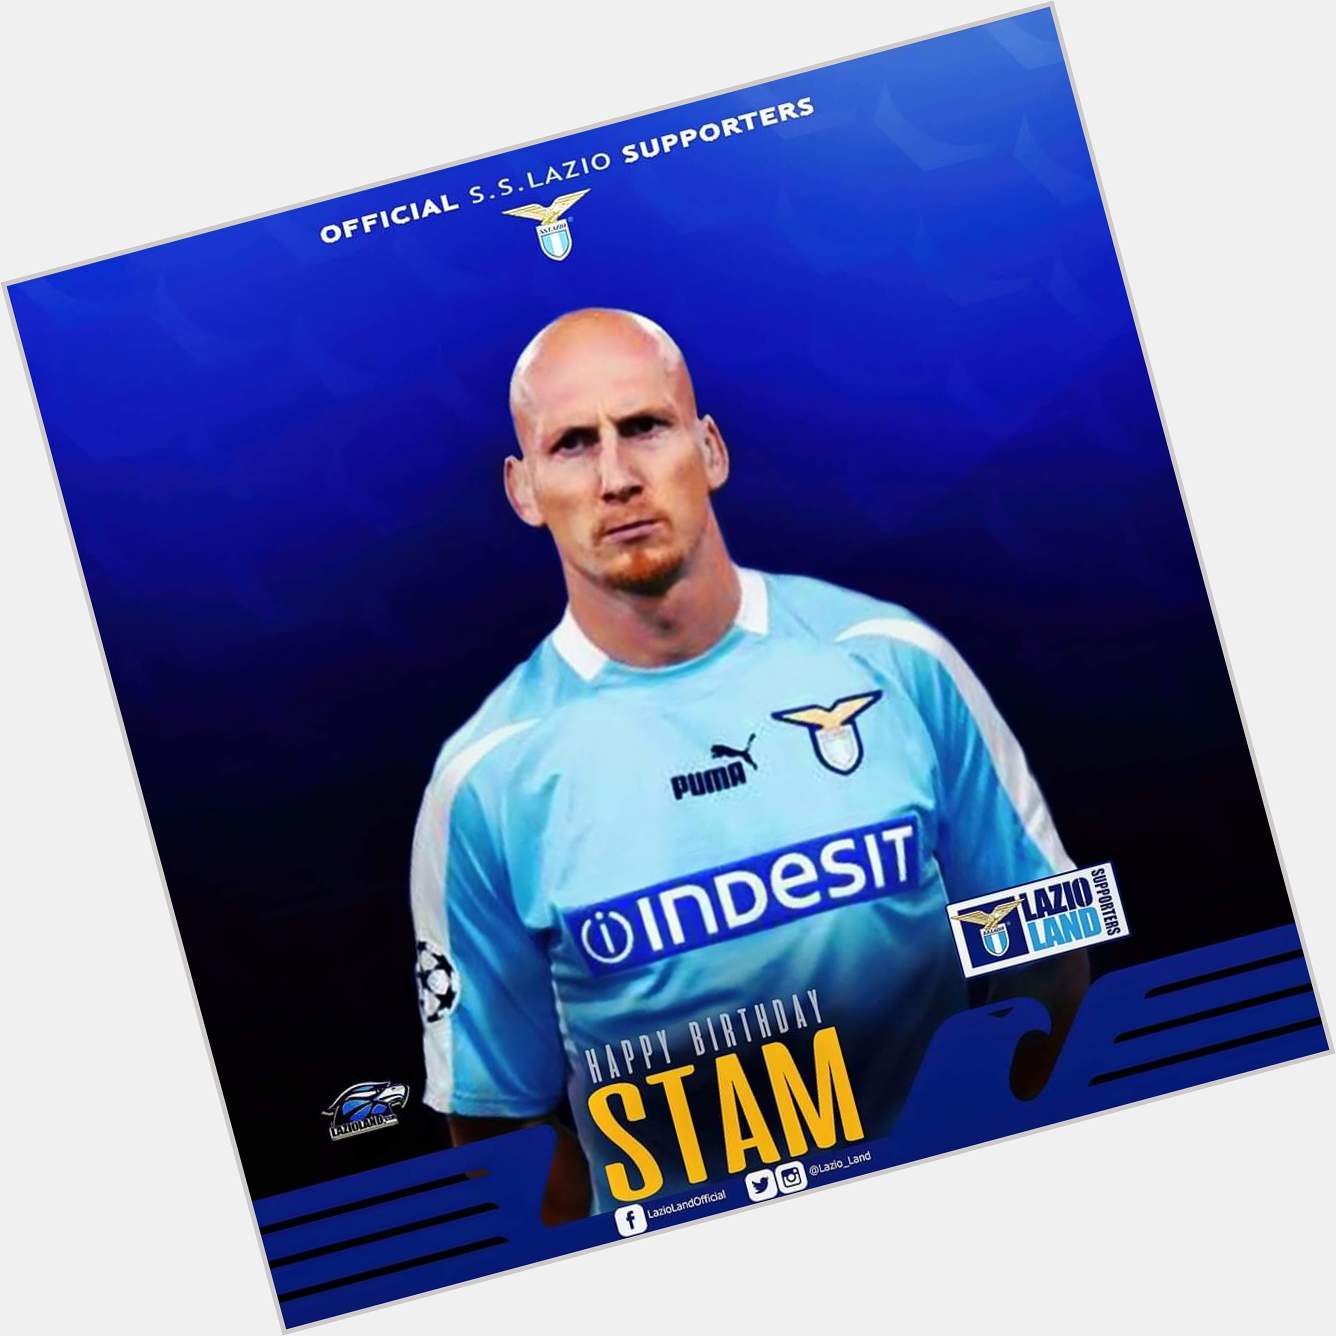 A happy 48th birthday to Jaap Stam.     